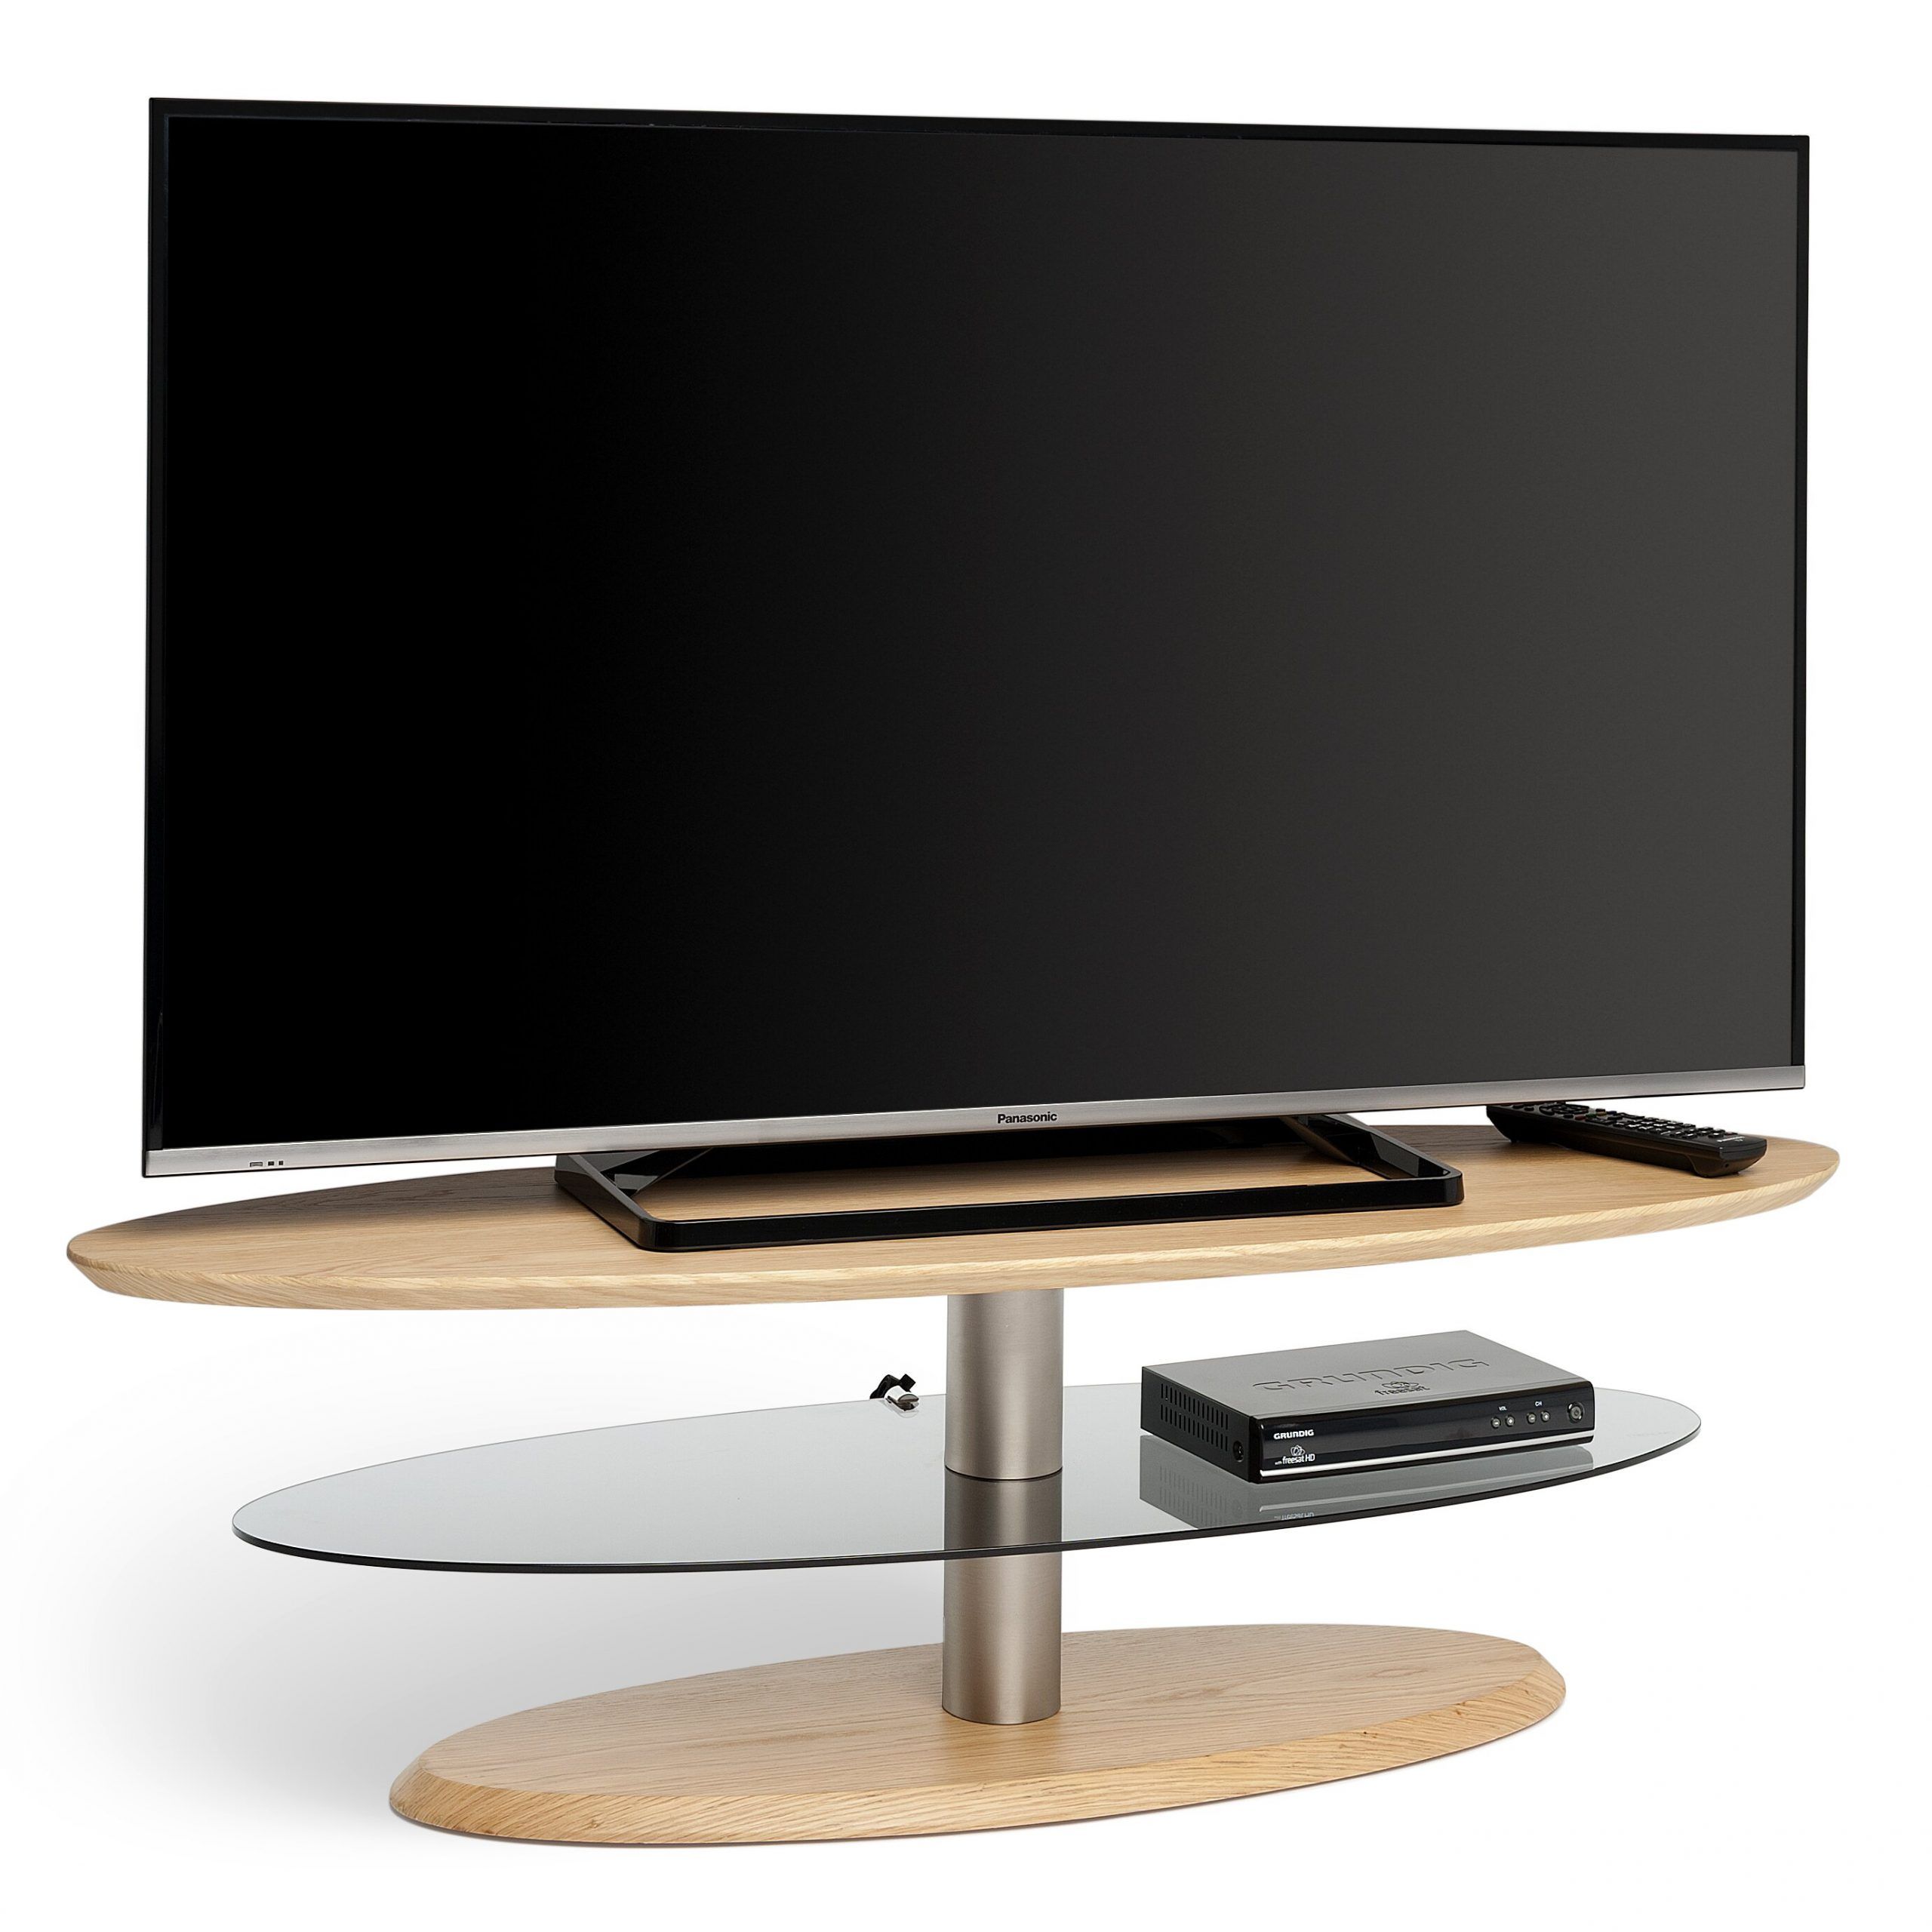 Techlink Eclipse Tv Stand & Reviews | Wayfair With Techlink Tv Stands Sale (View 2 of 15)